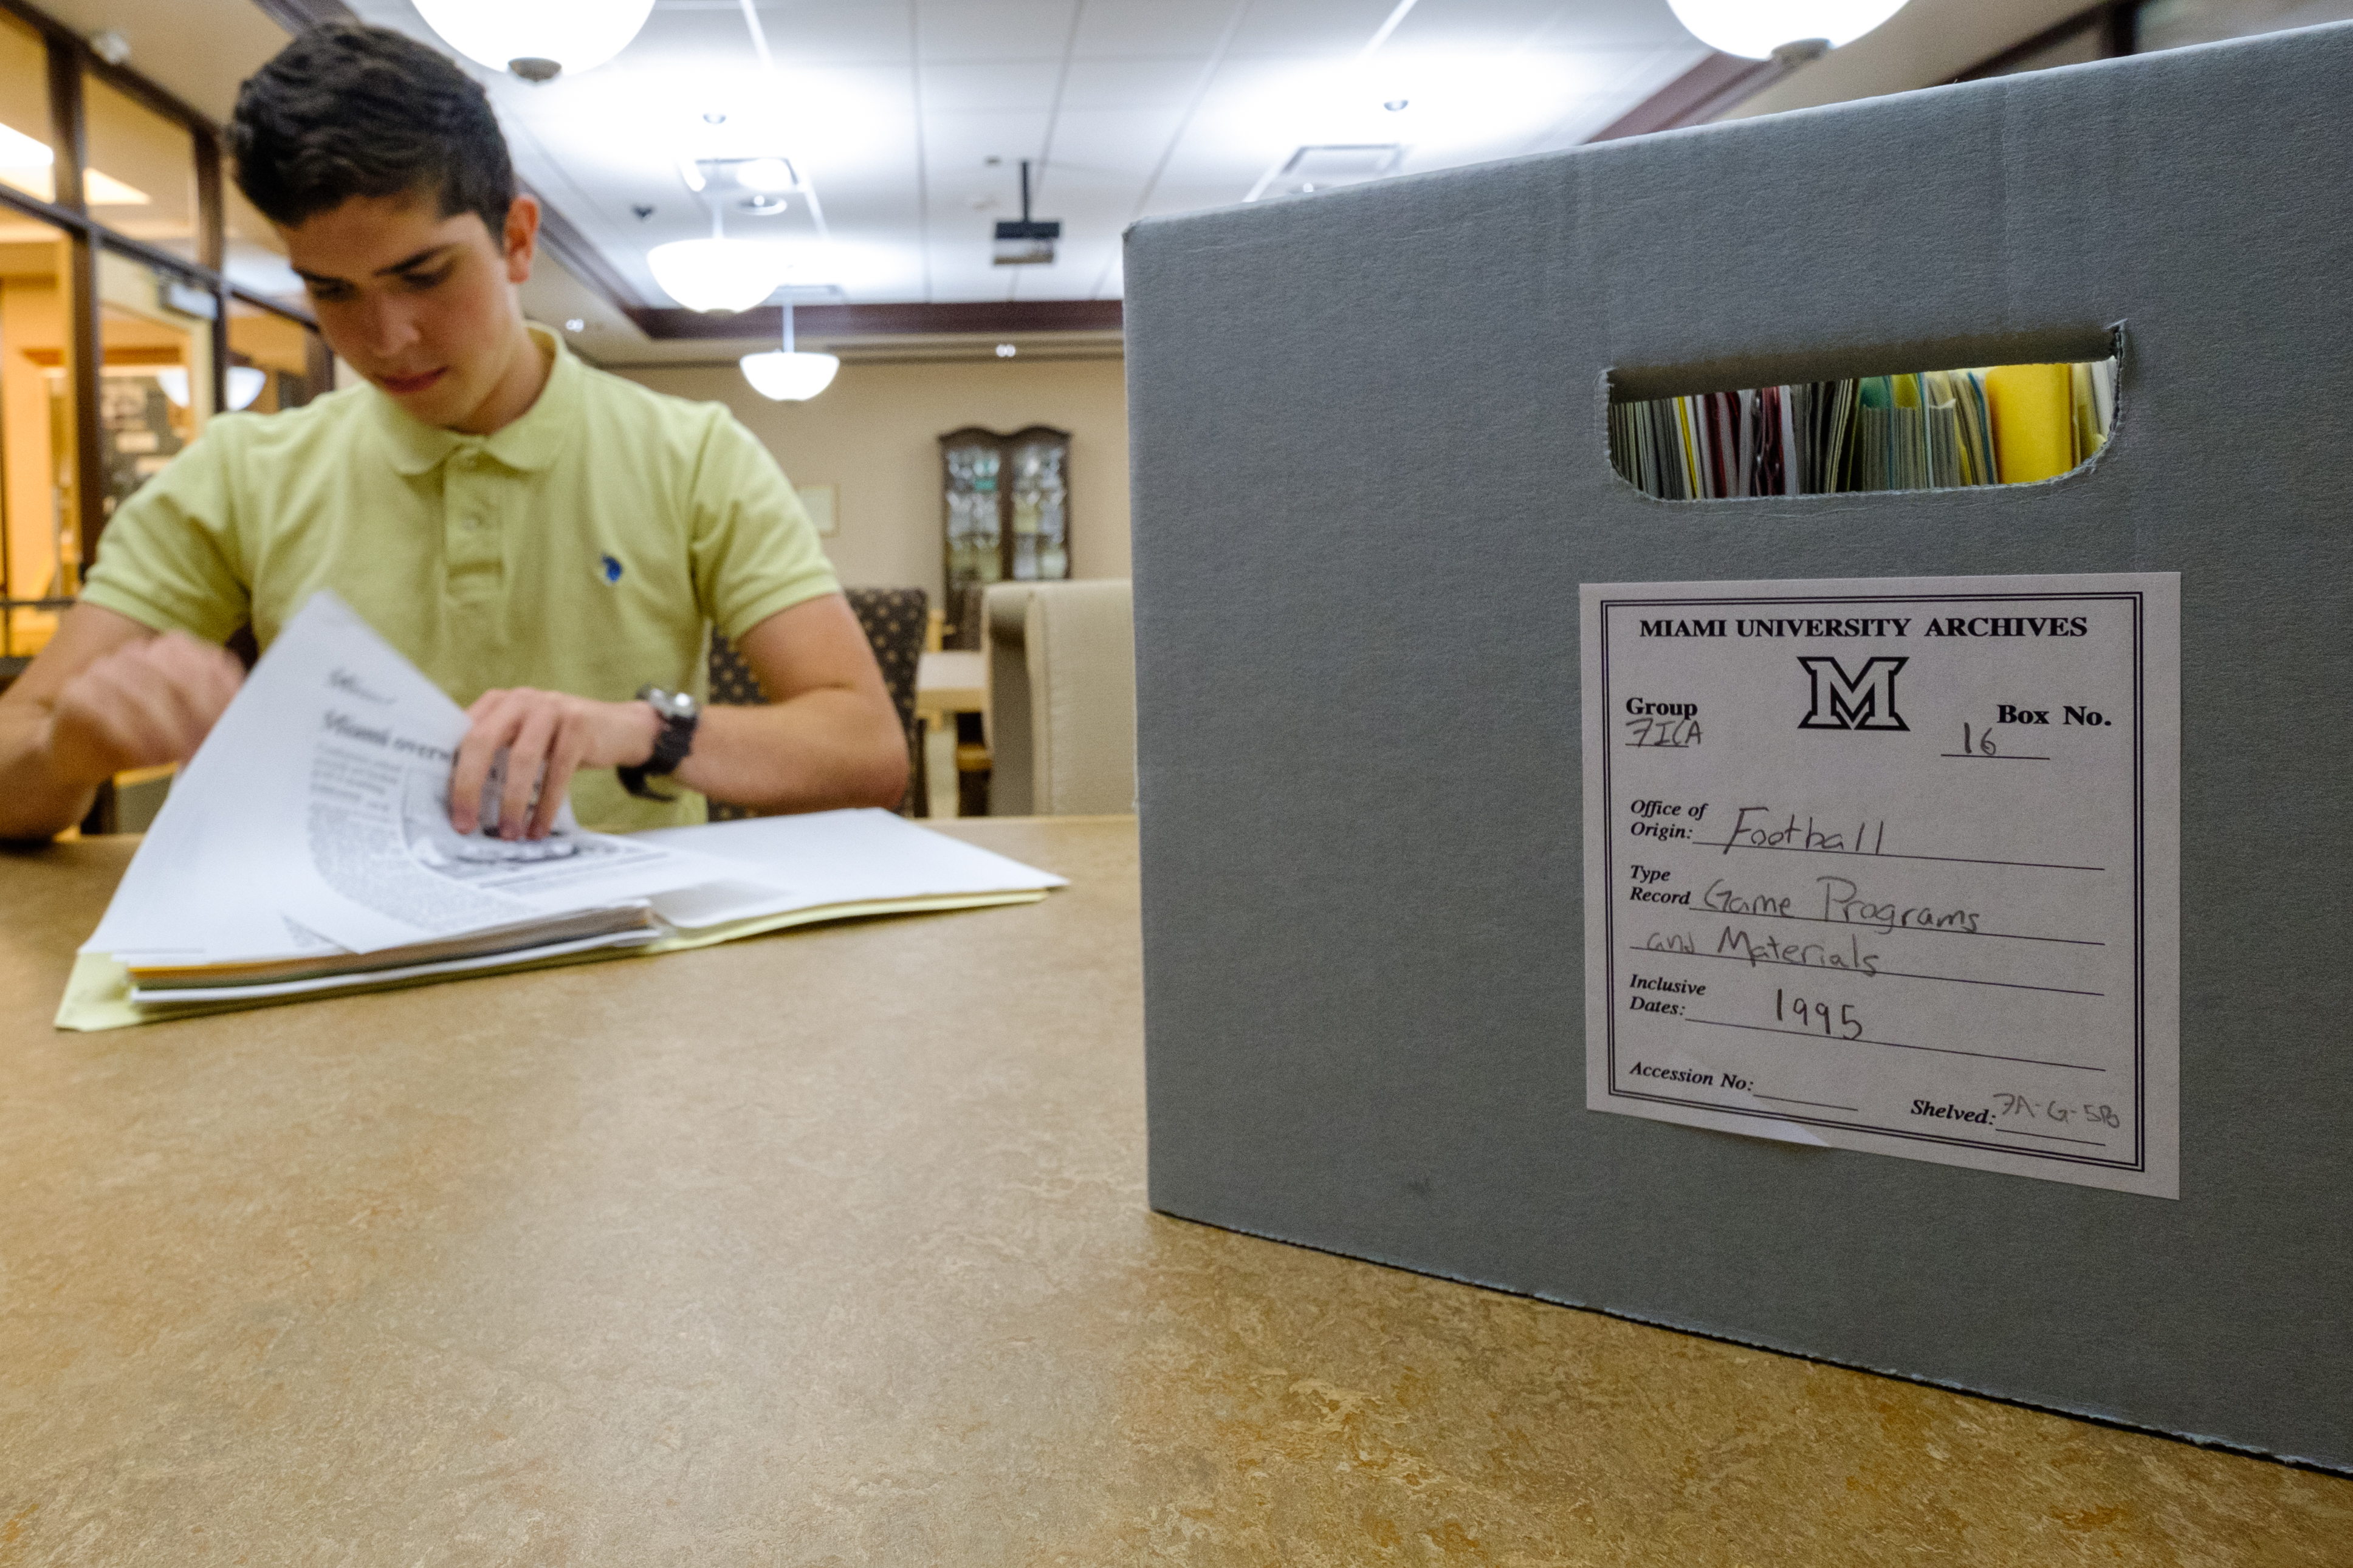 Photo of student with box of archival material